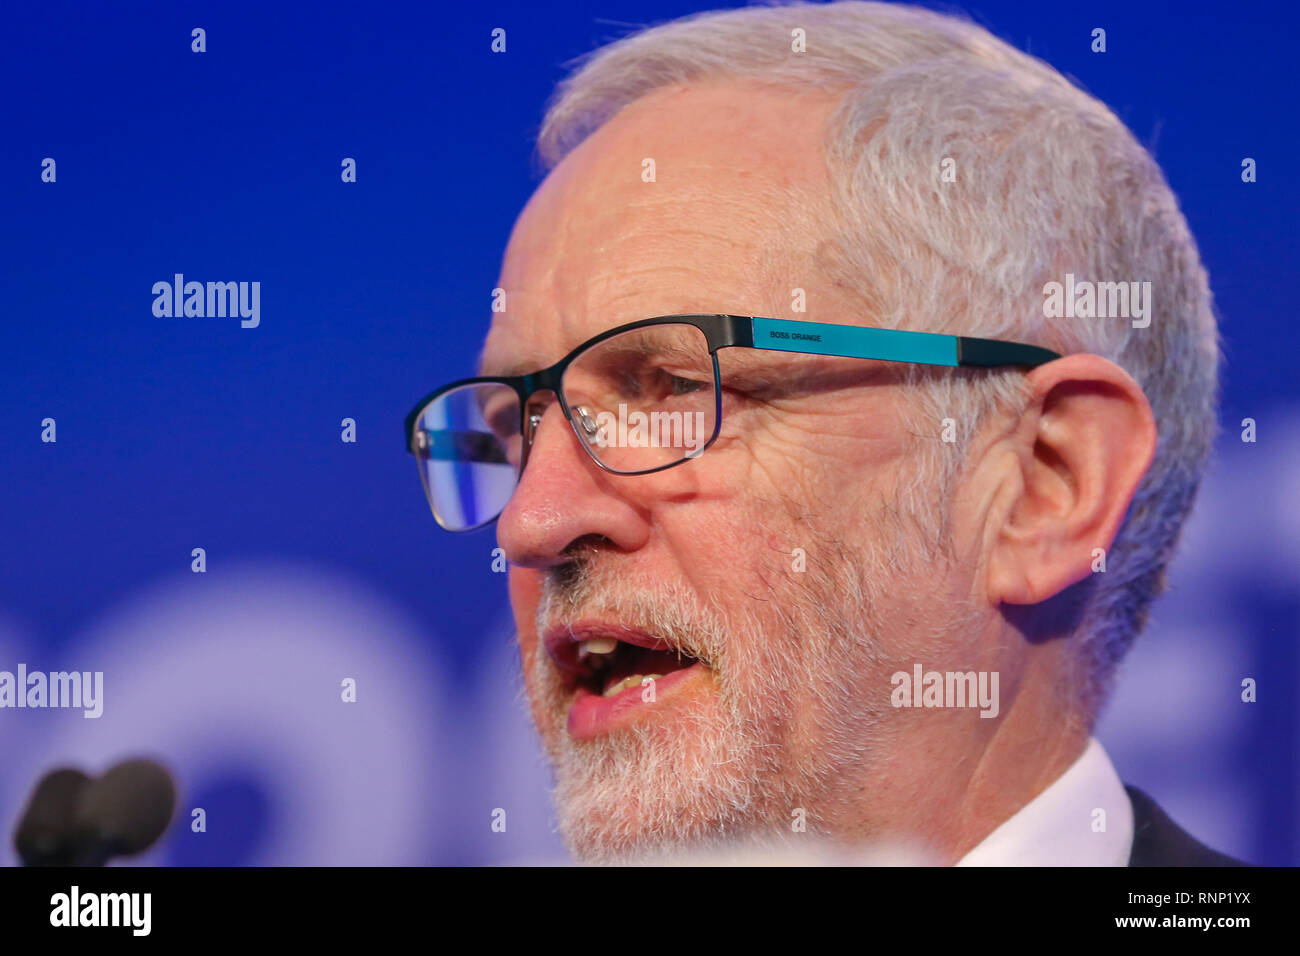 London, UK. 19th Feb, 2019. Jeremy Corbyn MP Leader of Labor Party is seen speaking during the 2019 National Manufacturing Conference in Queen Elizabeth II Center. The conference addresses the difficulties and challenges the manufacturing sector will face post-Brexit. Credit: Dinendra Haria/SOPA Images/ZUMA Wire/Alamy Live News Stock Photo